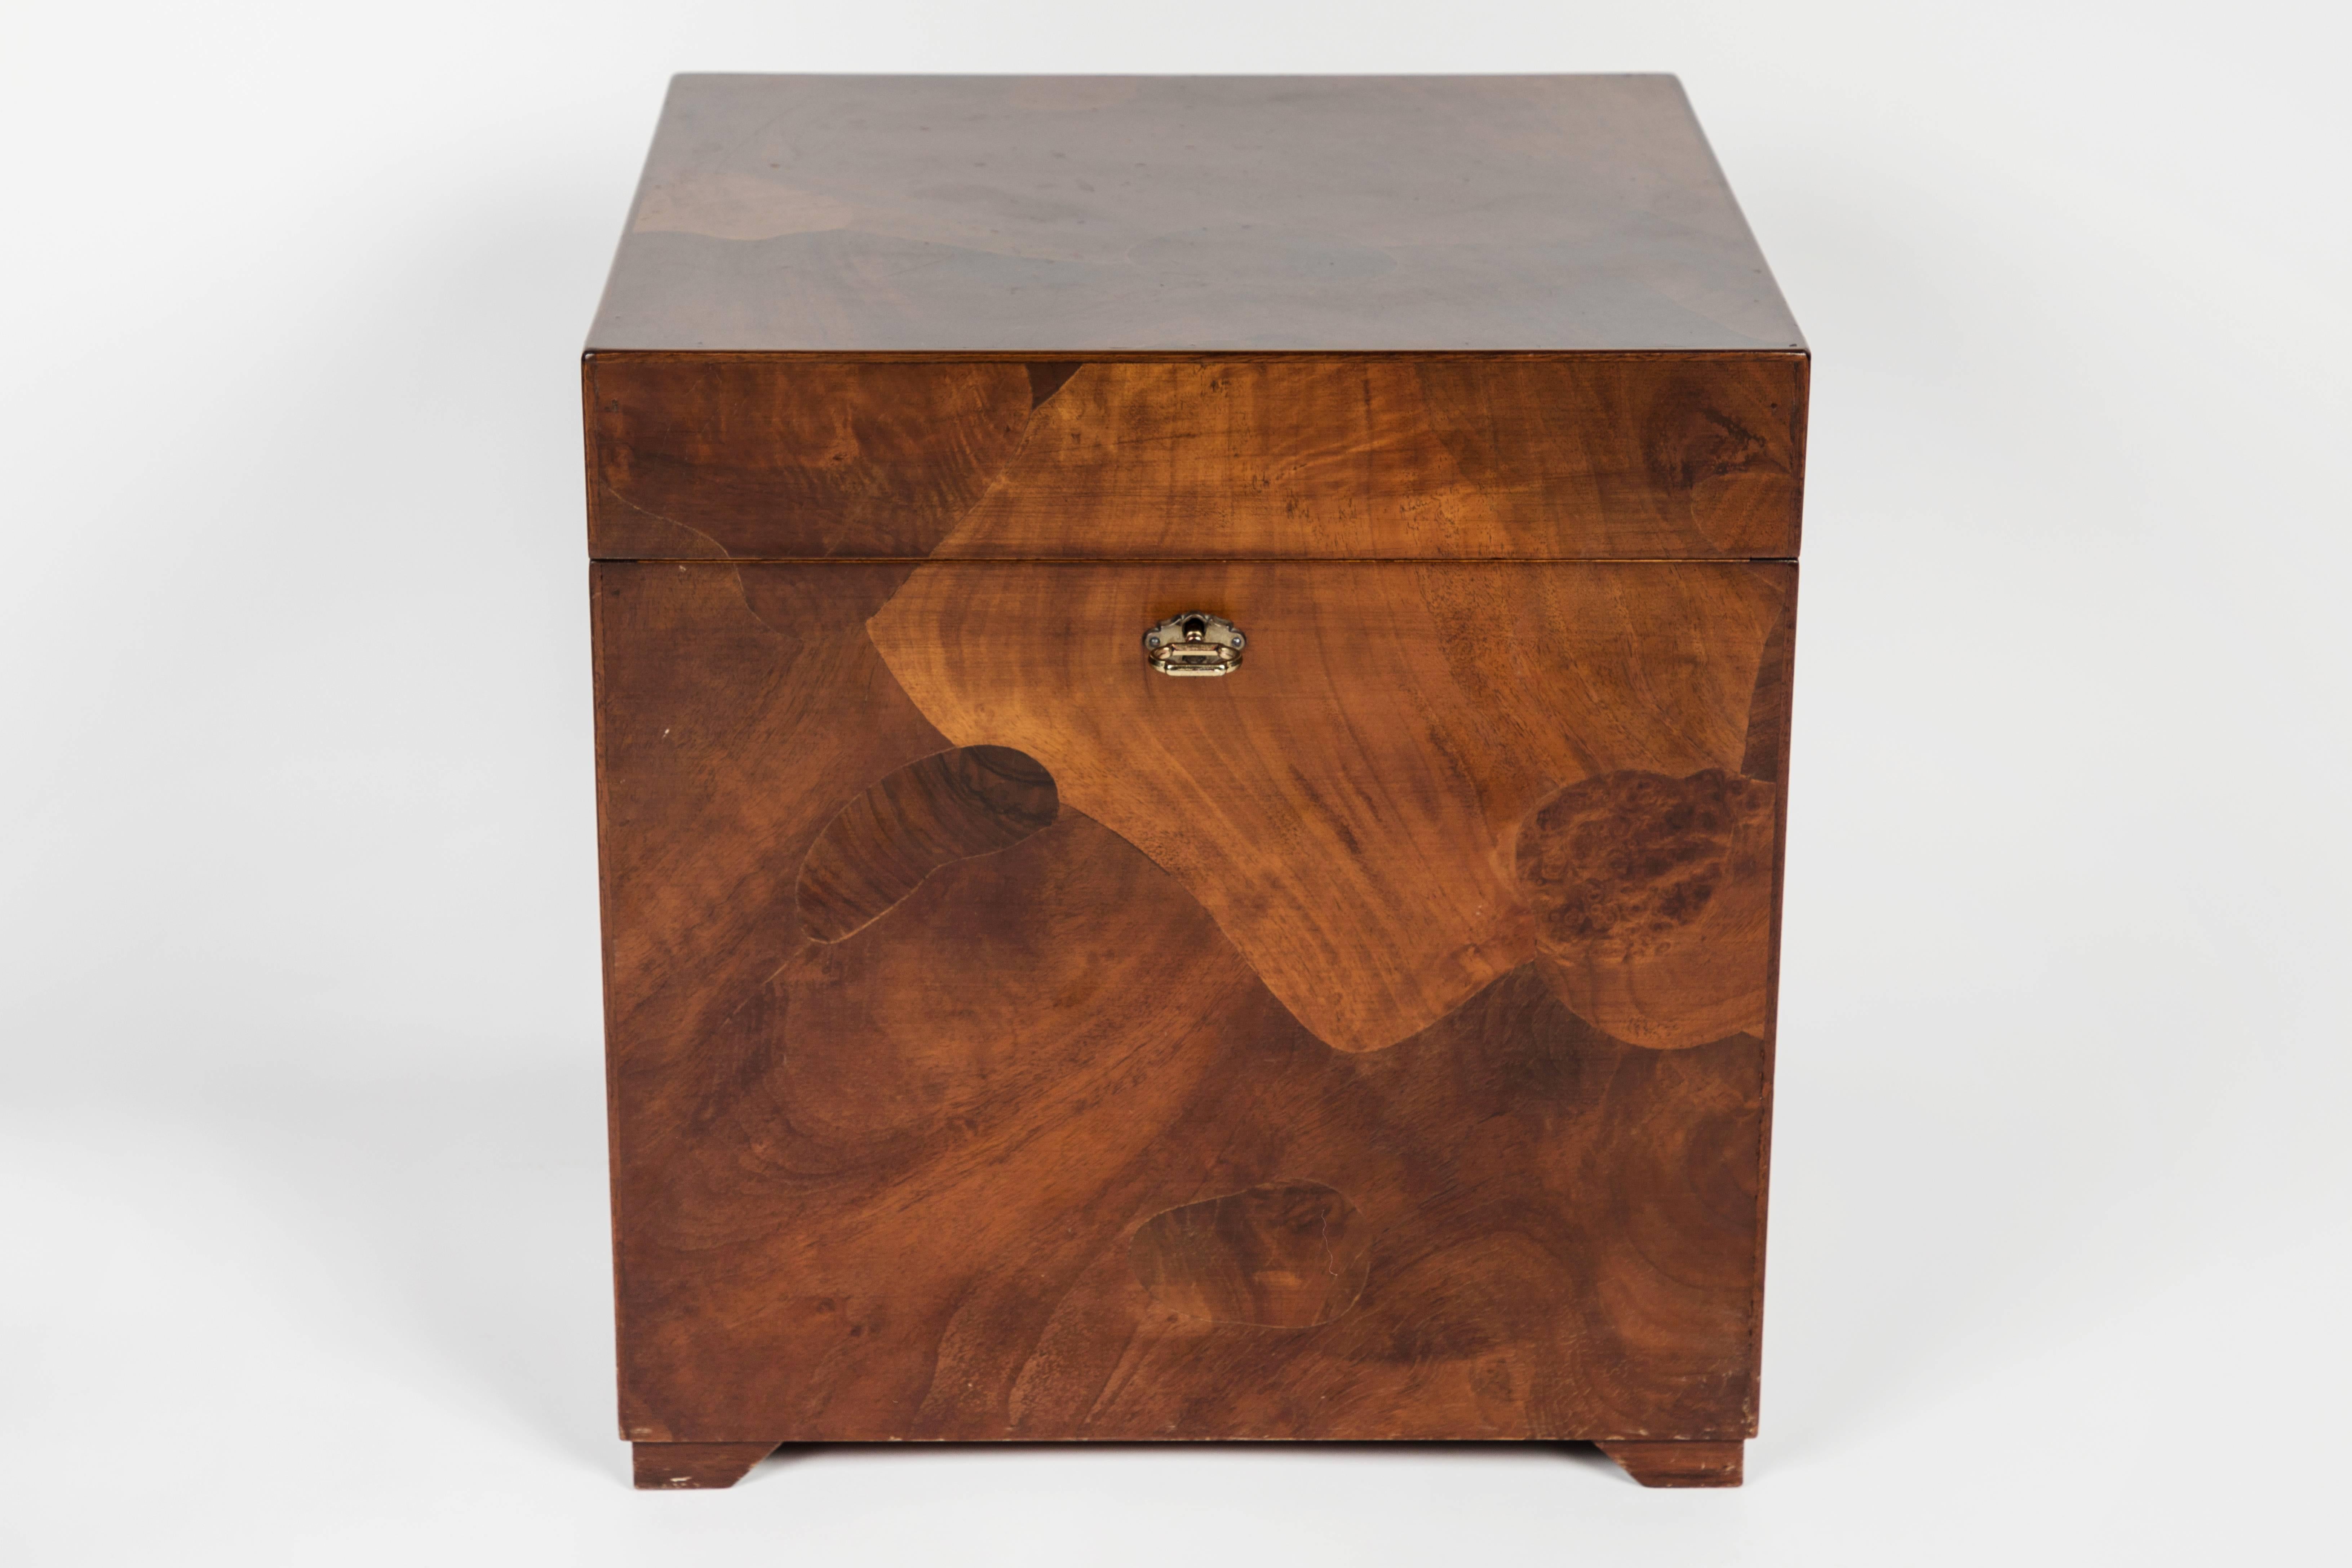 Elegant campaign chest made of beautiful Olivewood burl and brass fittings making it the perfect addition to any space. The chest has recently been waxed in order to show off the beautiful wood graining and tonality of this piece. The interior is